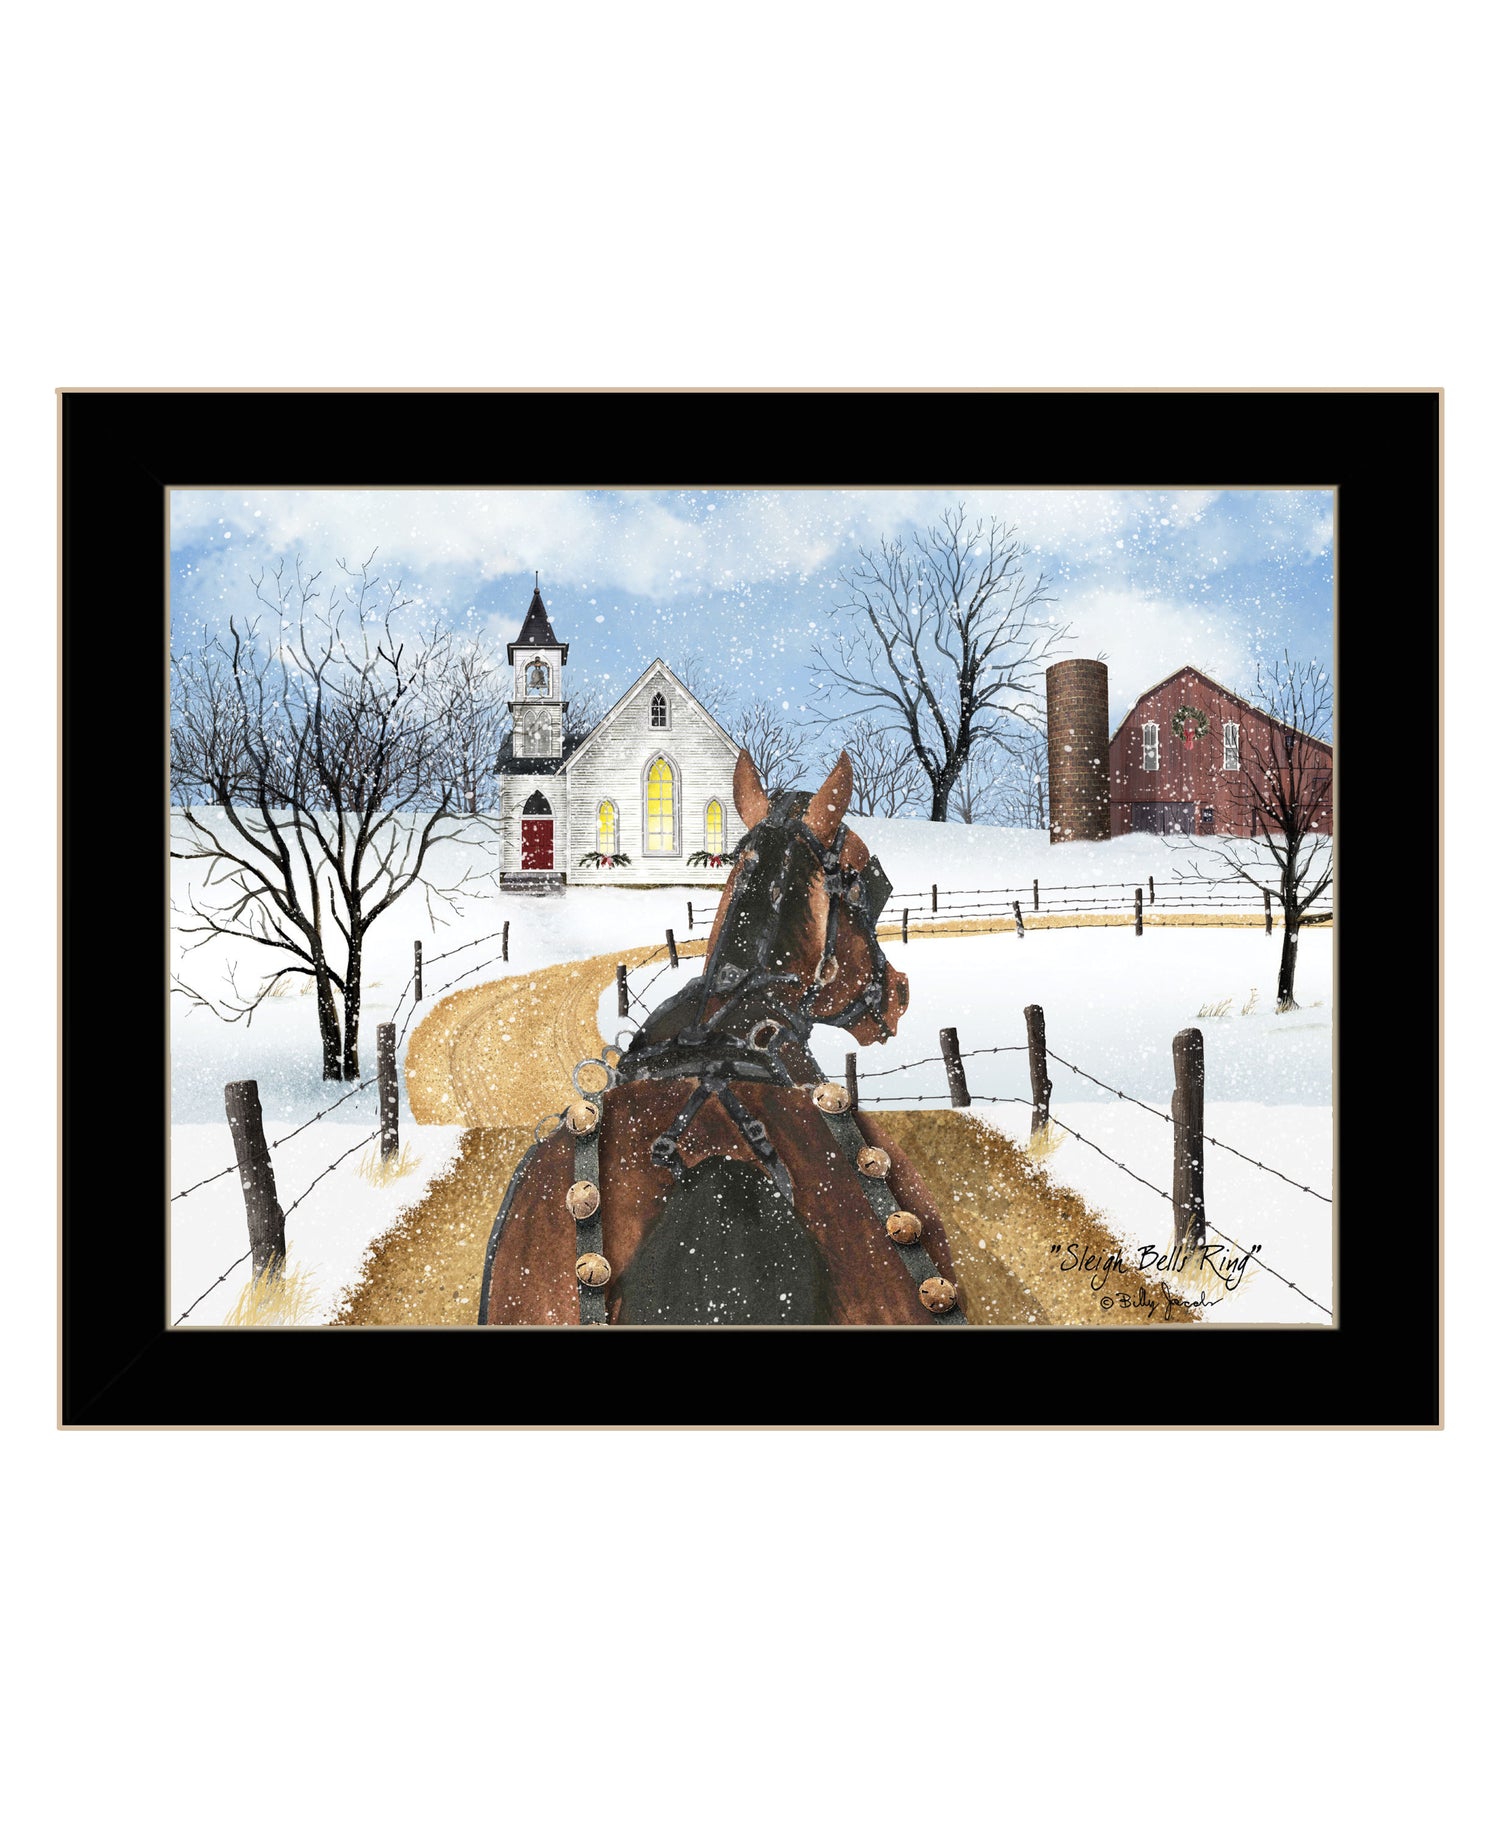 "Sleigh Bells Ring" by Billy Jacobs, Ready to Hang Framed Print, Black Frame